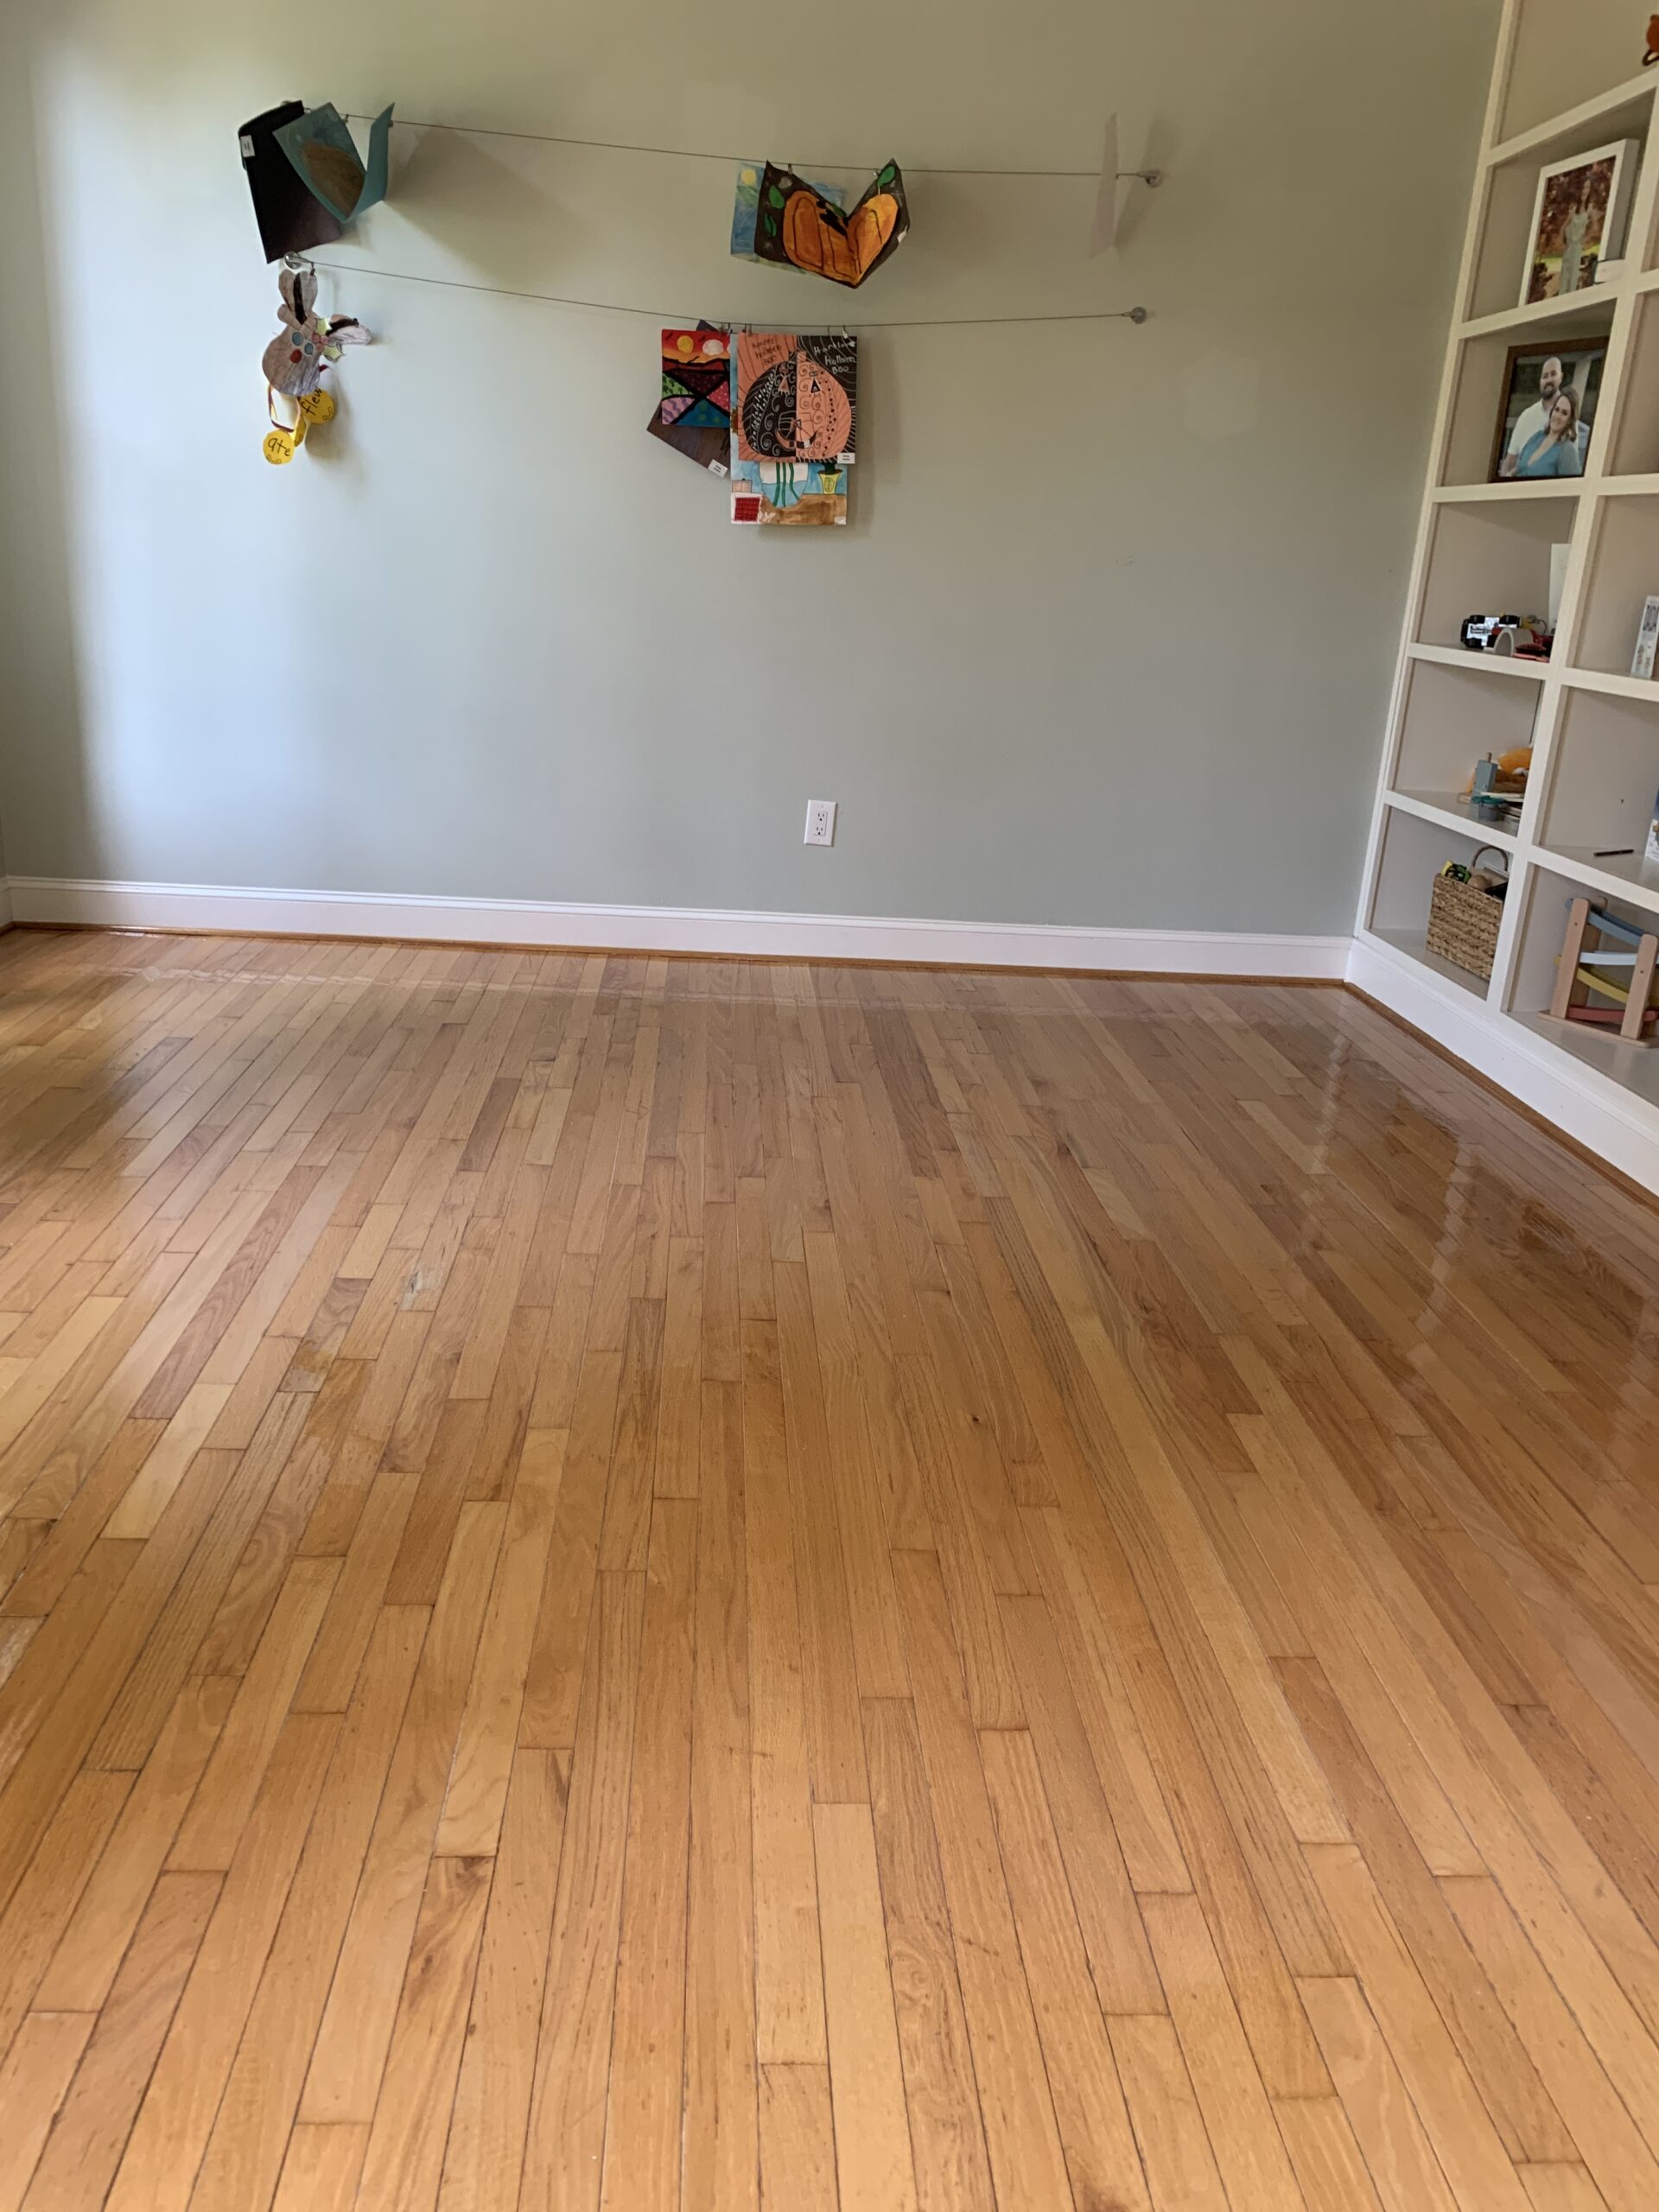 A Gleaming Guide to Cleaning Hardwood Floors